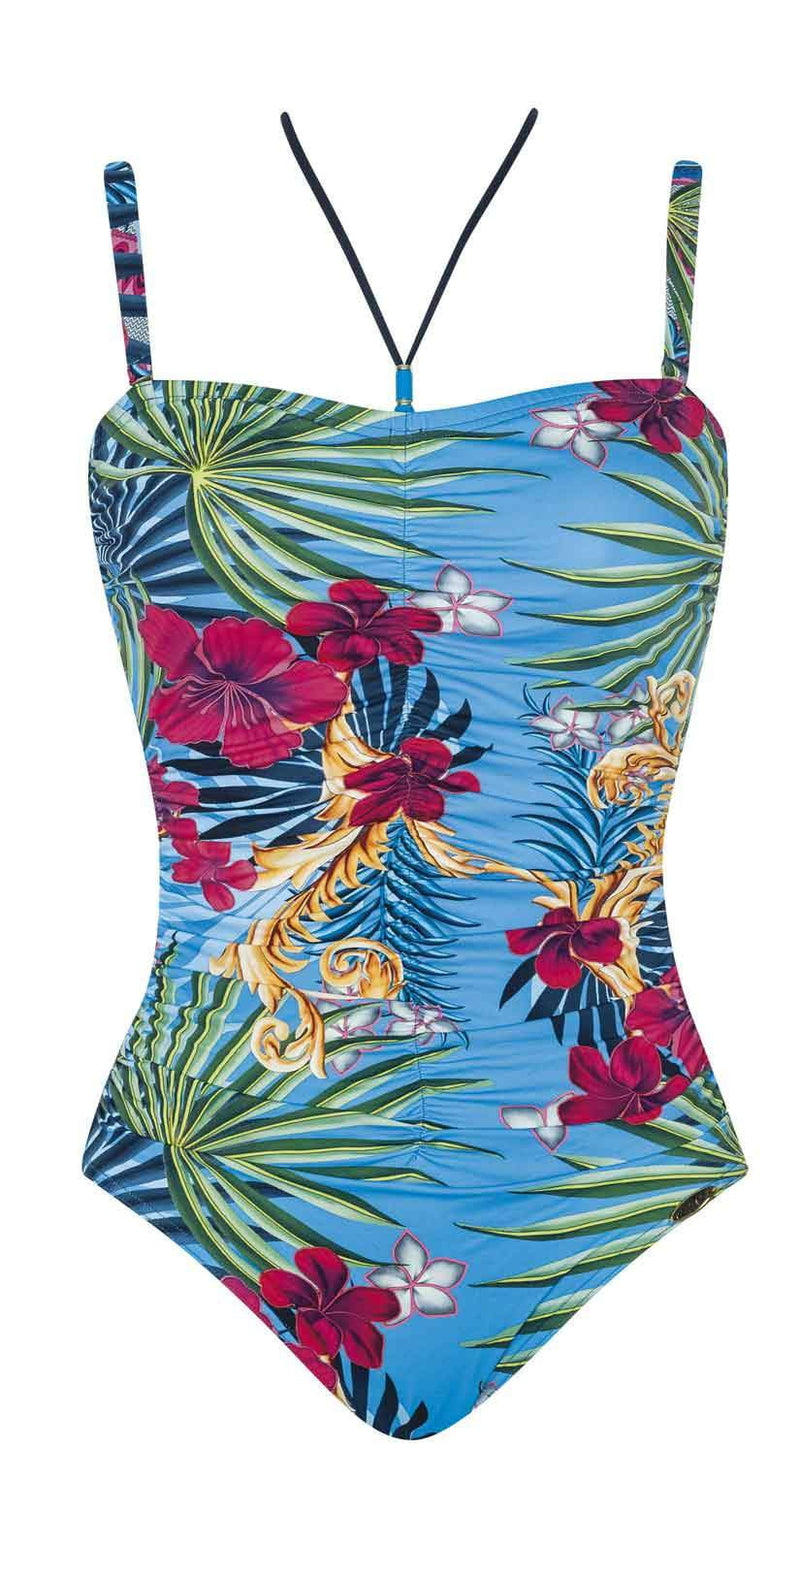 Sunflair Blue Henry Bandeau One Piece Swimsuit: